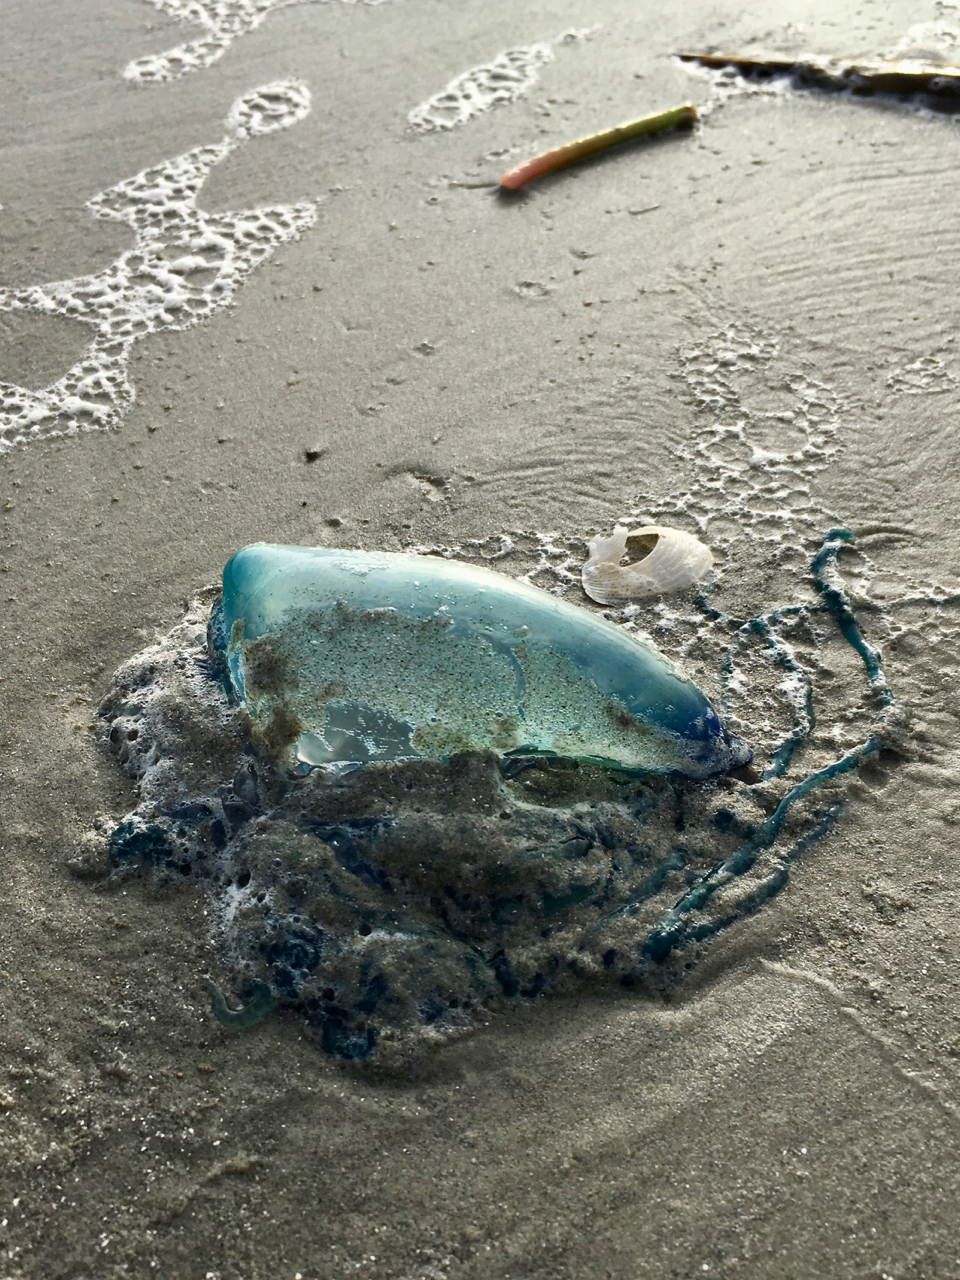 a jellyfish washed up on the beach